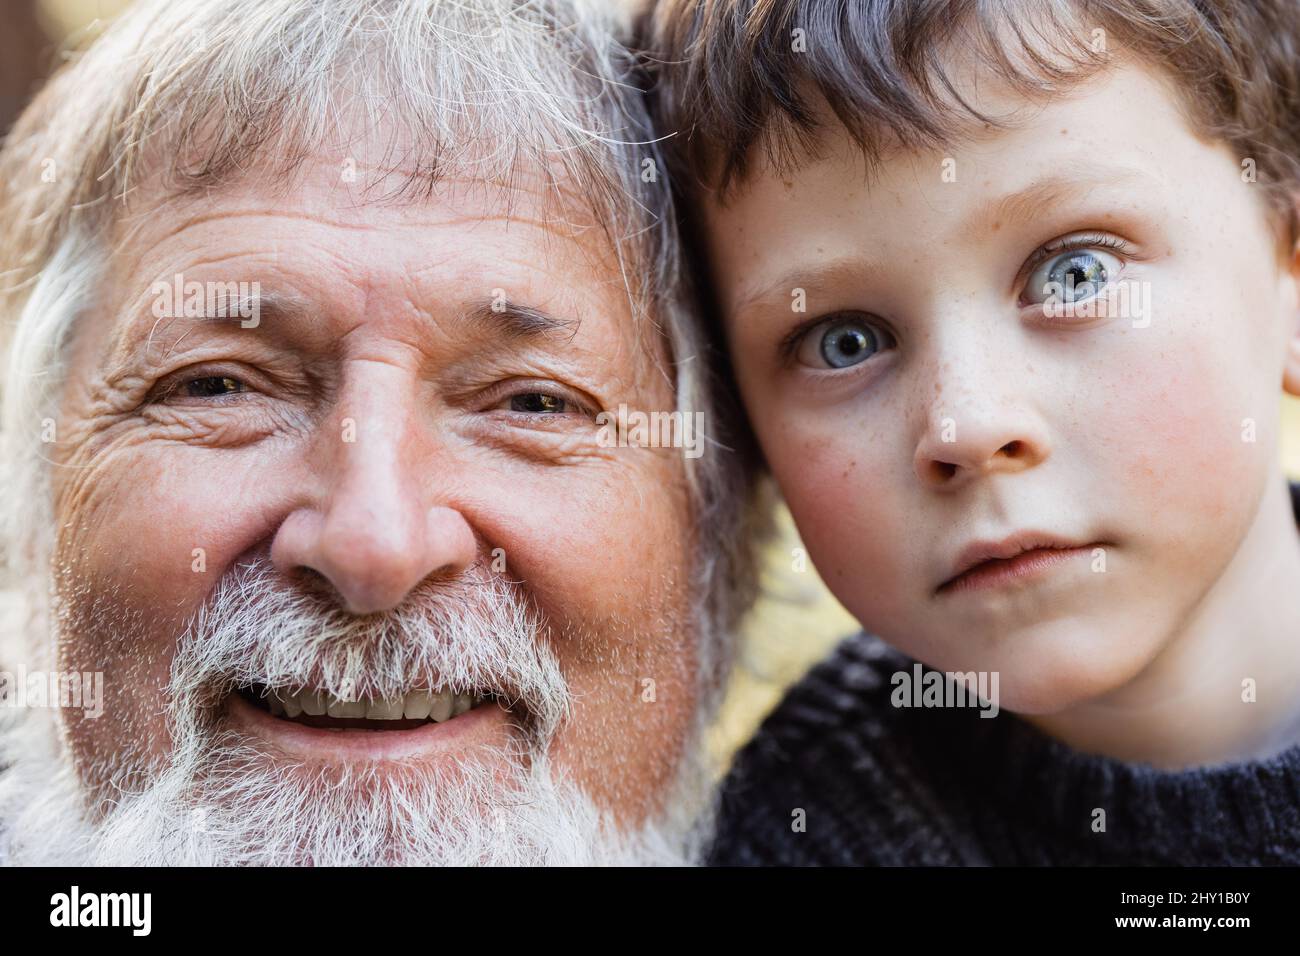 Positive aged man with gray beard and hair and cute smiling kid with blue eyes looking at camera in forest against blurred background Stock Photo